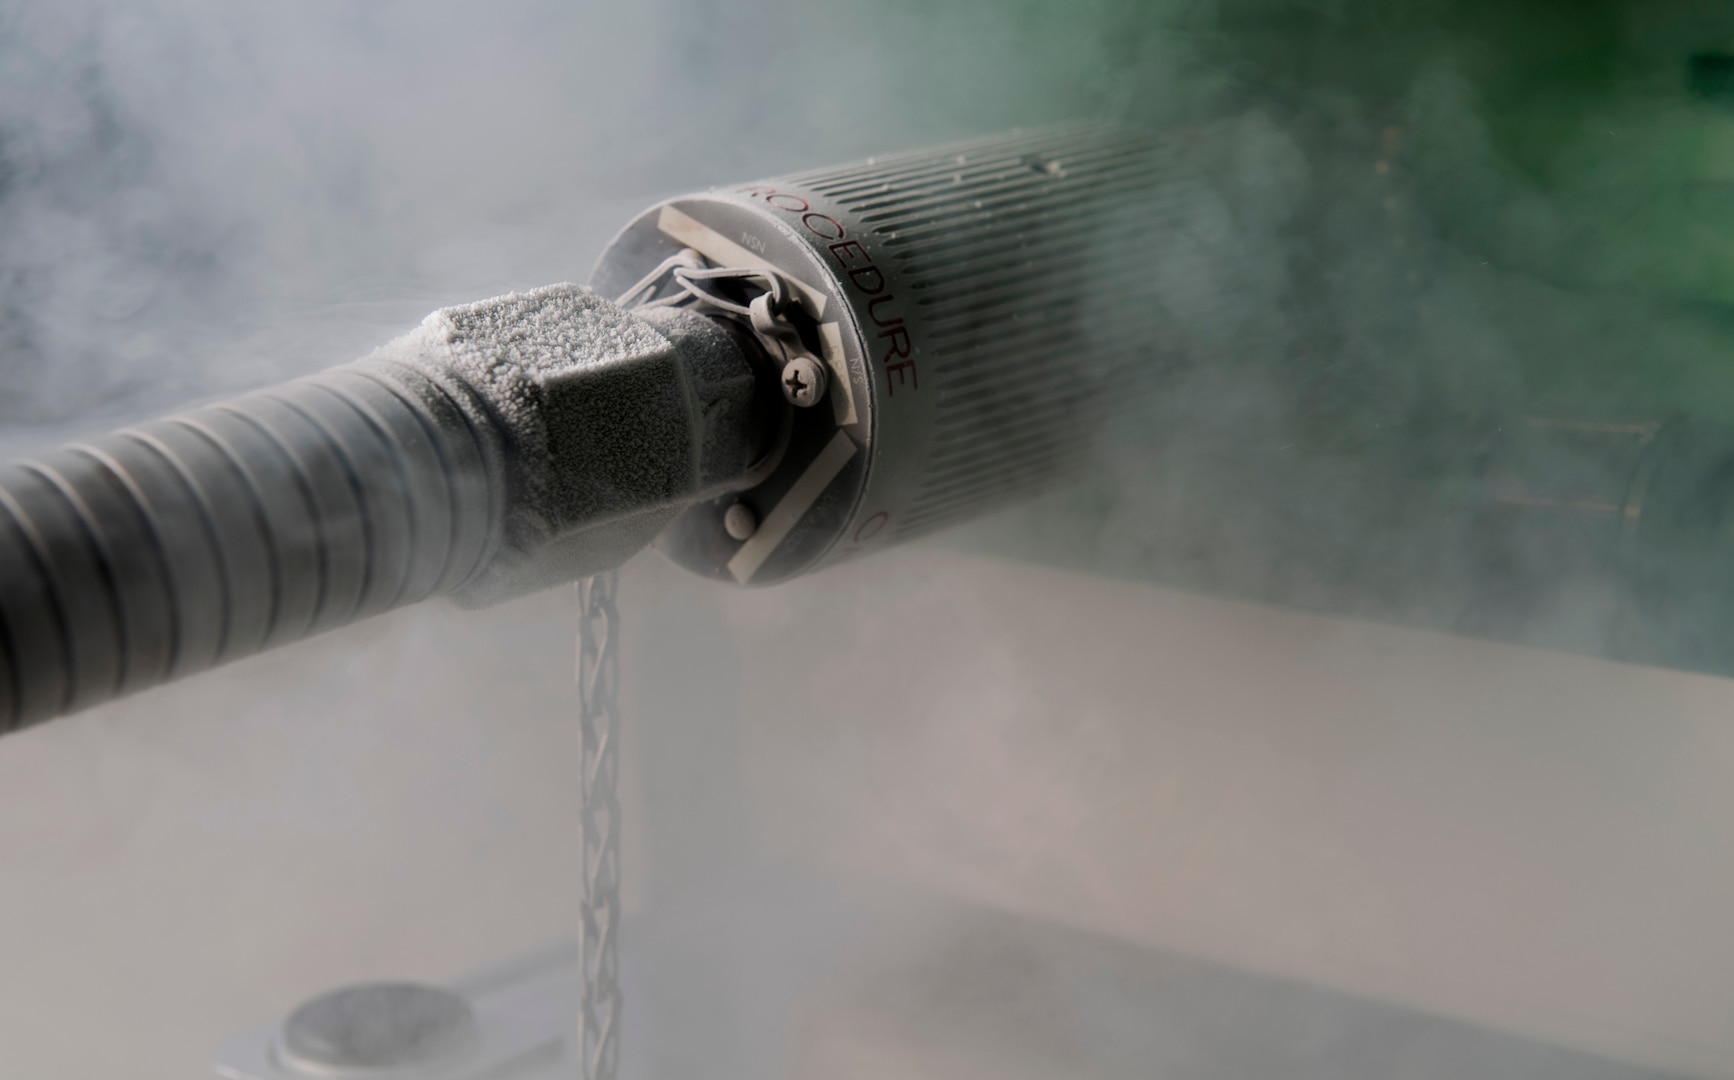 Ice forms around the hose of an oxygen generator and liquefier as it pumps liquid oxygen into a next-generation portable therapeutic liquid oxygen system on Ramstein Air Base, Germany, Sept. 7, 2017. The OGL is used to fill medical equipment with liquid oxygen and was recently purchased by the 86th Medical Support Squadron, along with a nitrogen generator, to cut their turnaround time for filling the equipment from three weeks to two or three days and to save the Air Force approximately $7,000 a month. (U.S. Air Force photo by Senior Airman Tryphena Mayhugh)